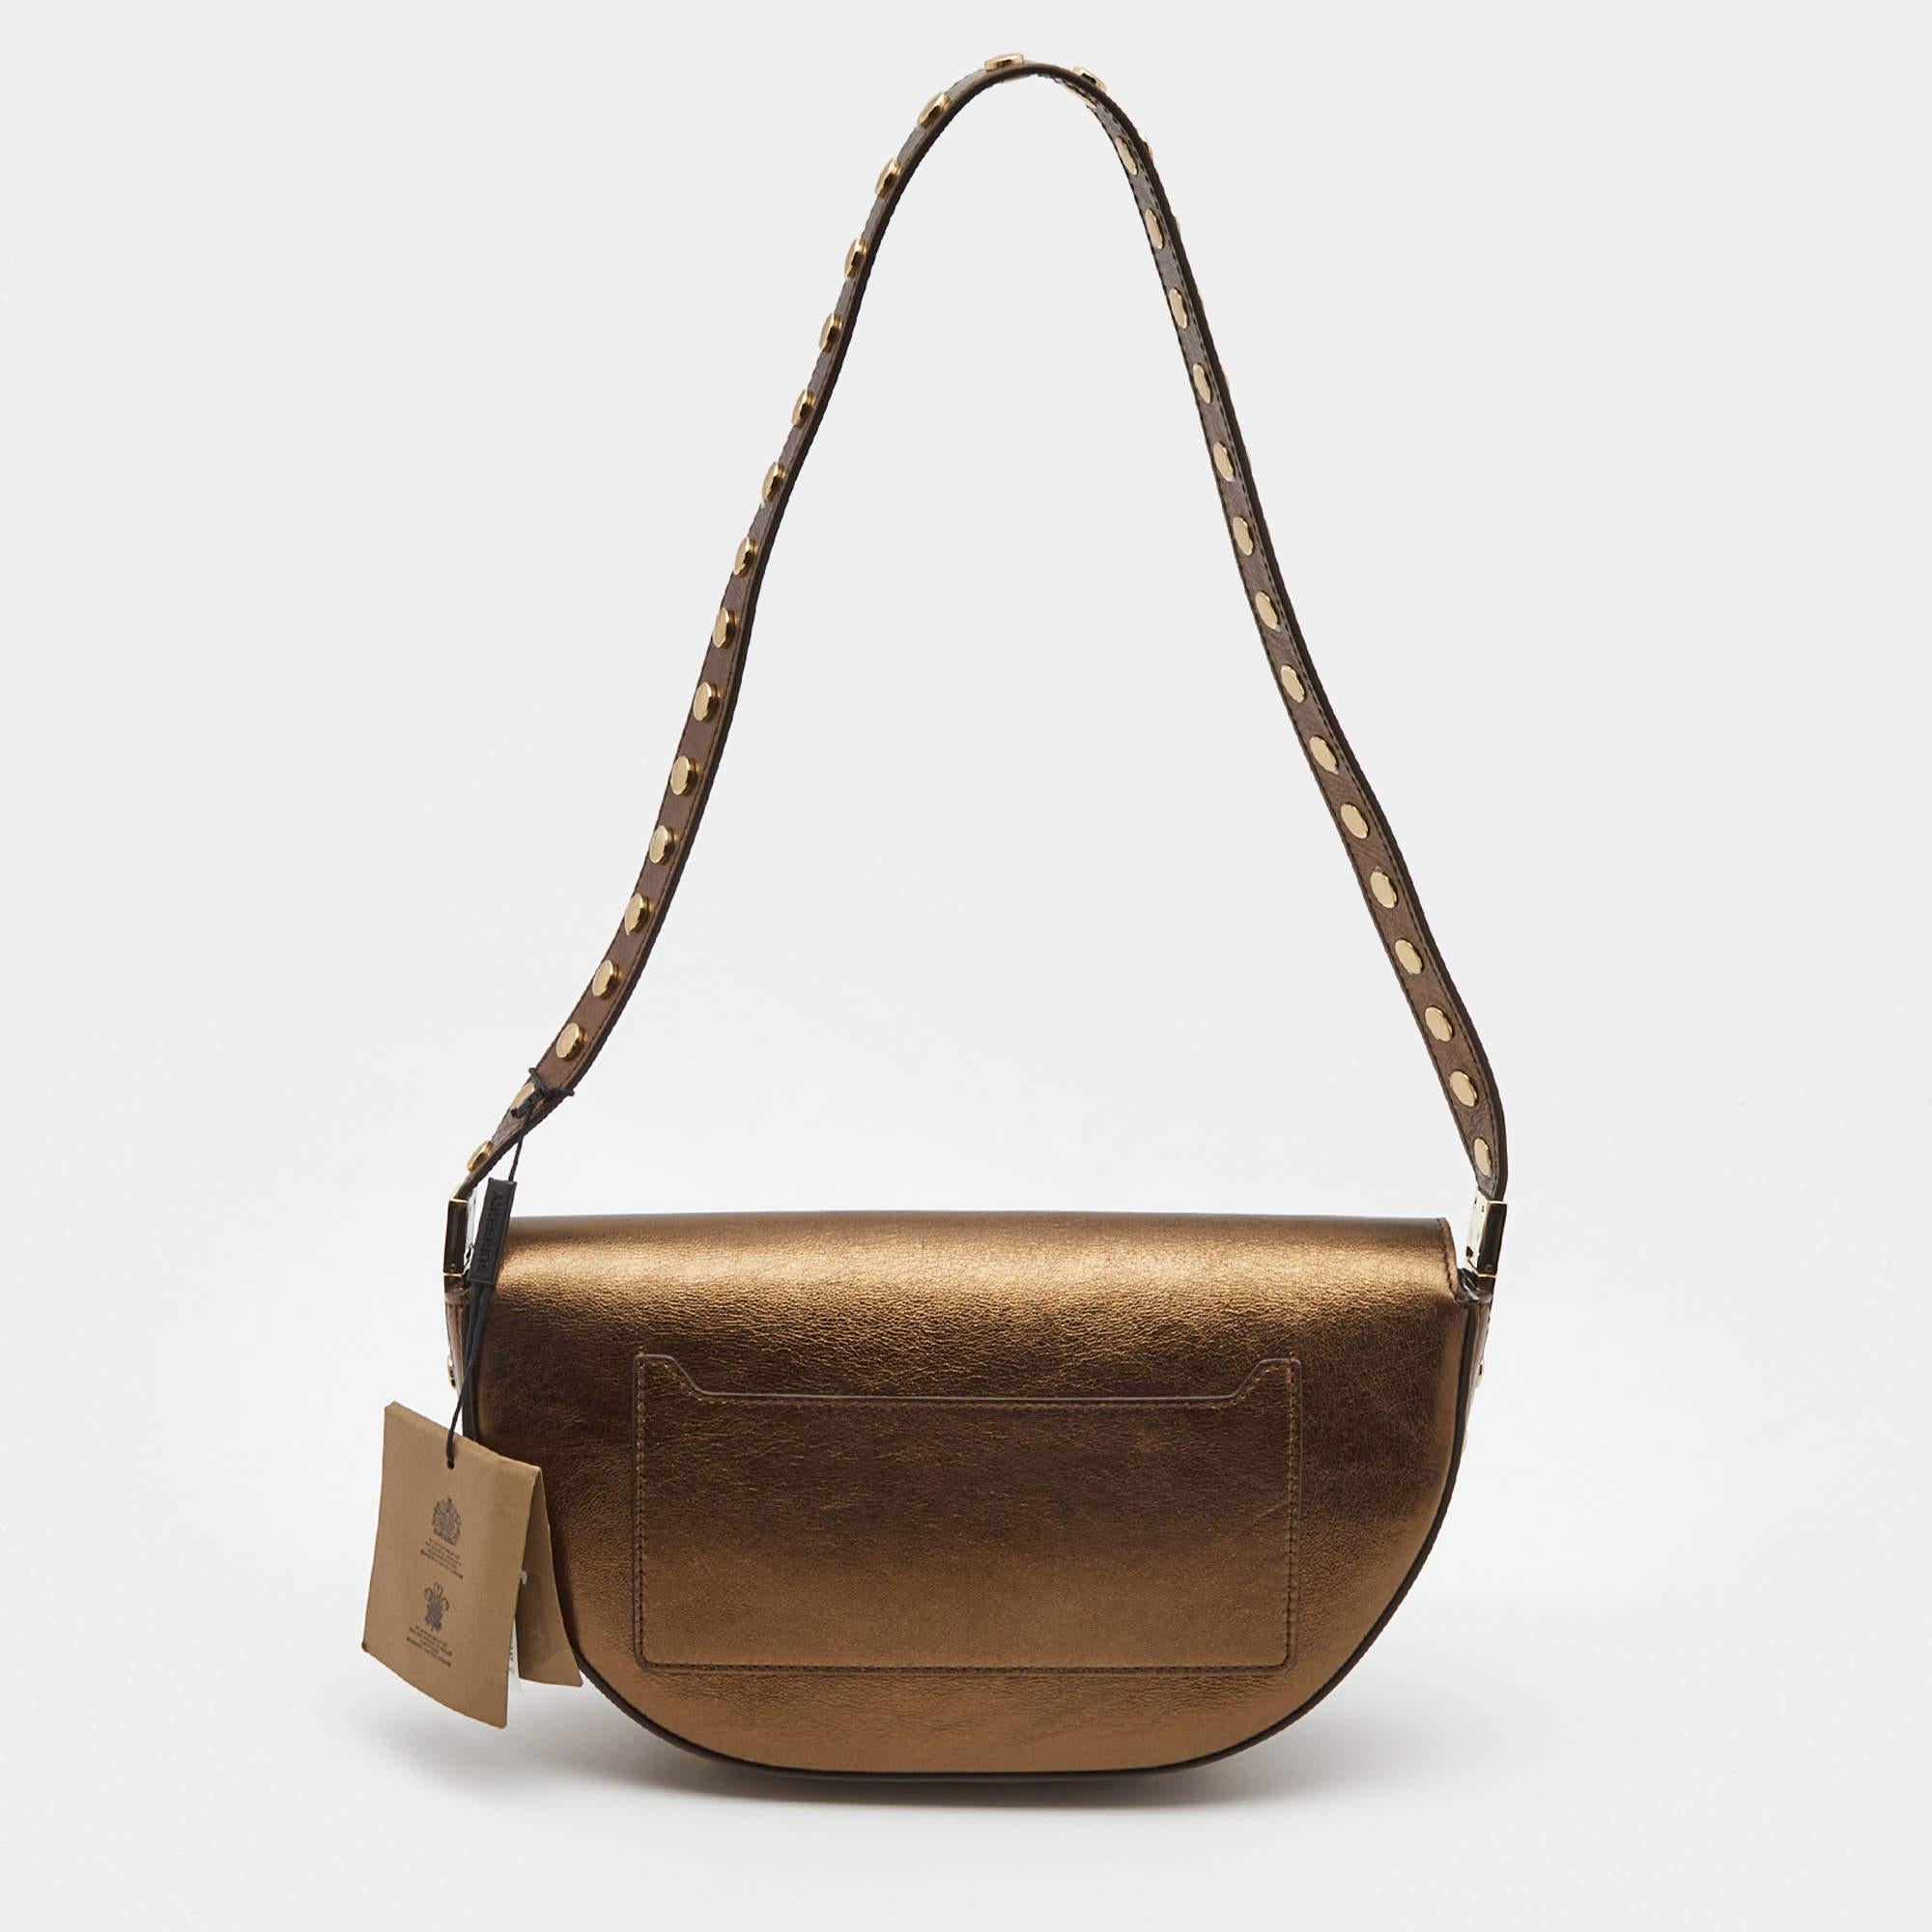 With an architectural shape, this Burberry Olympia bag resembles the crescent moon. The brand signature on the front lends to its instant identification, and it can be carried conveniently with a shoulder strap. Capturing the essence of feminity, it